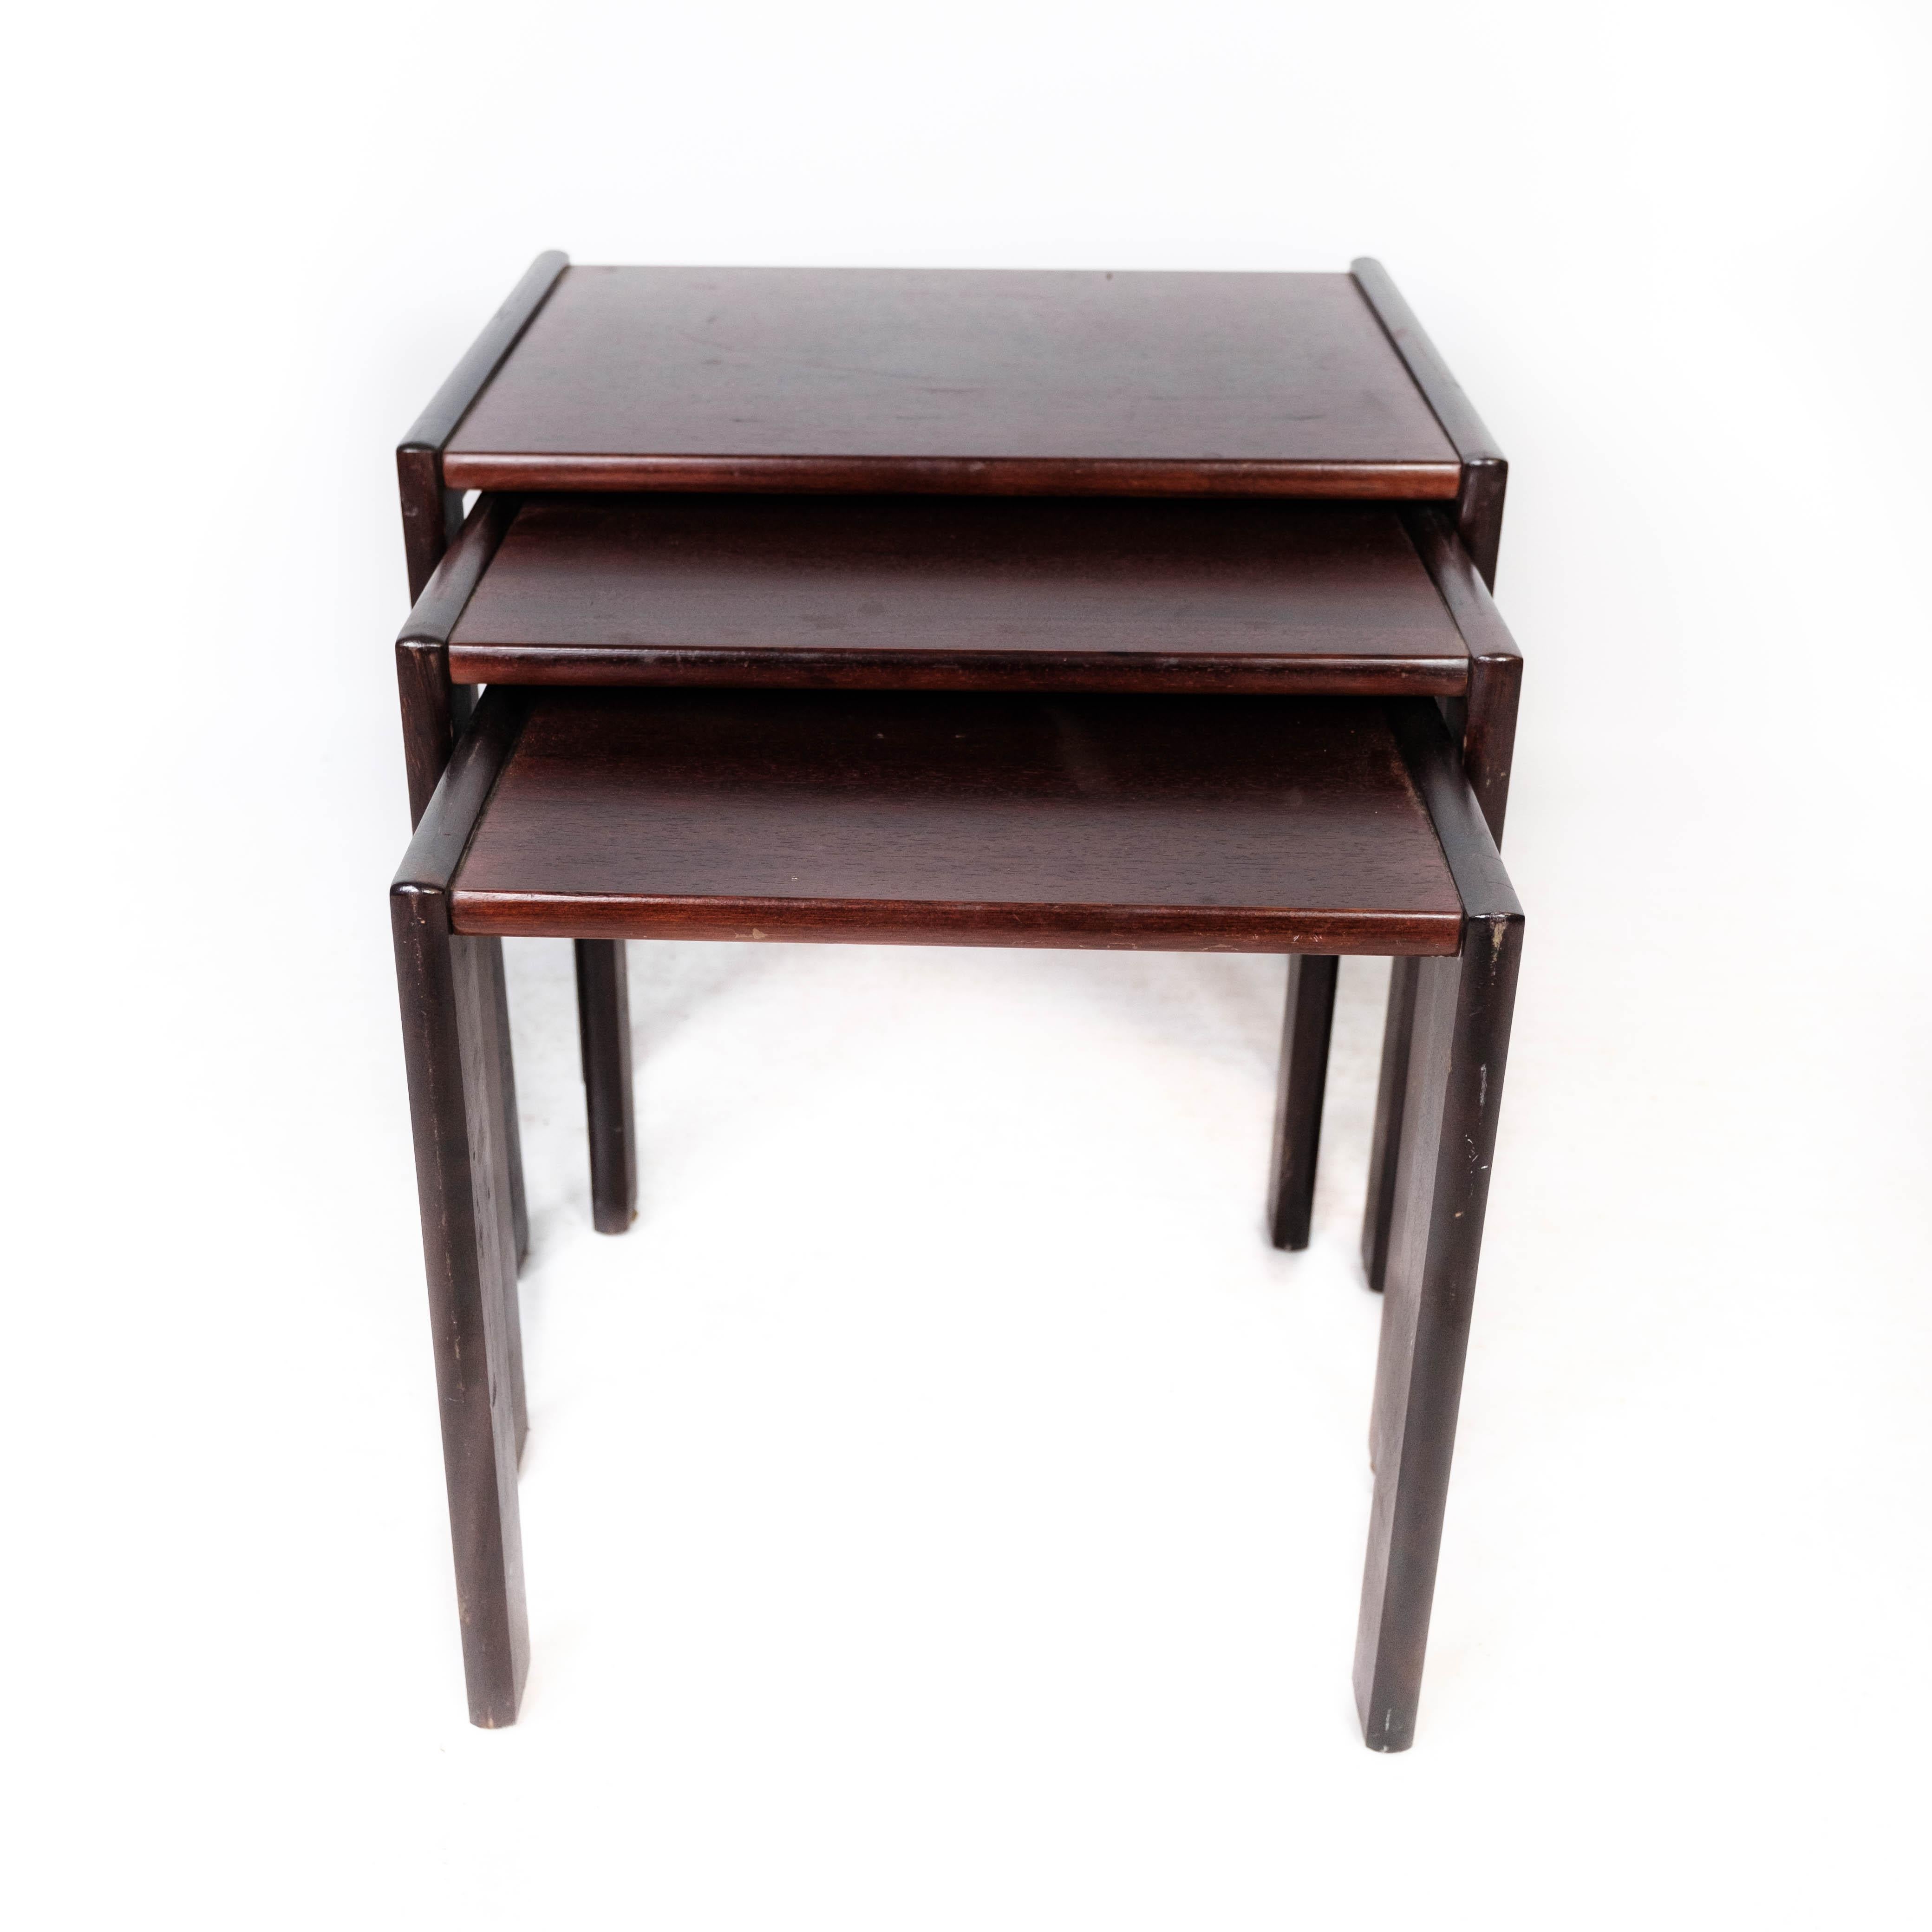 Set of nesting tables in dark wood of Danish design from the 1960s. The tables are in great vintage condition.